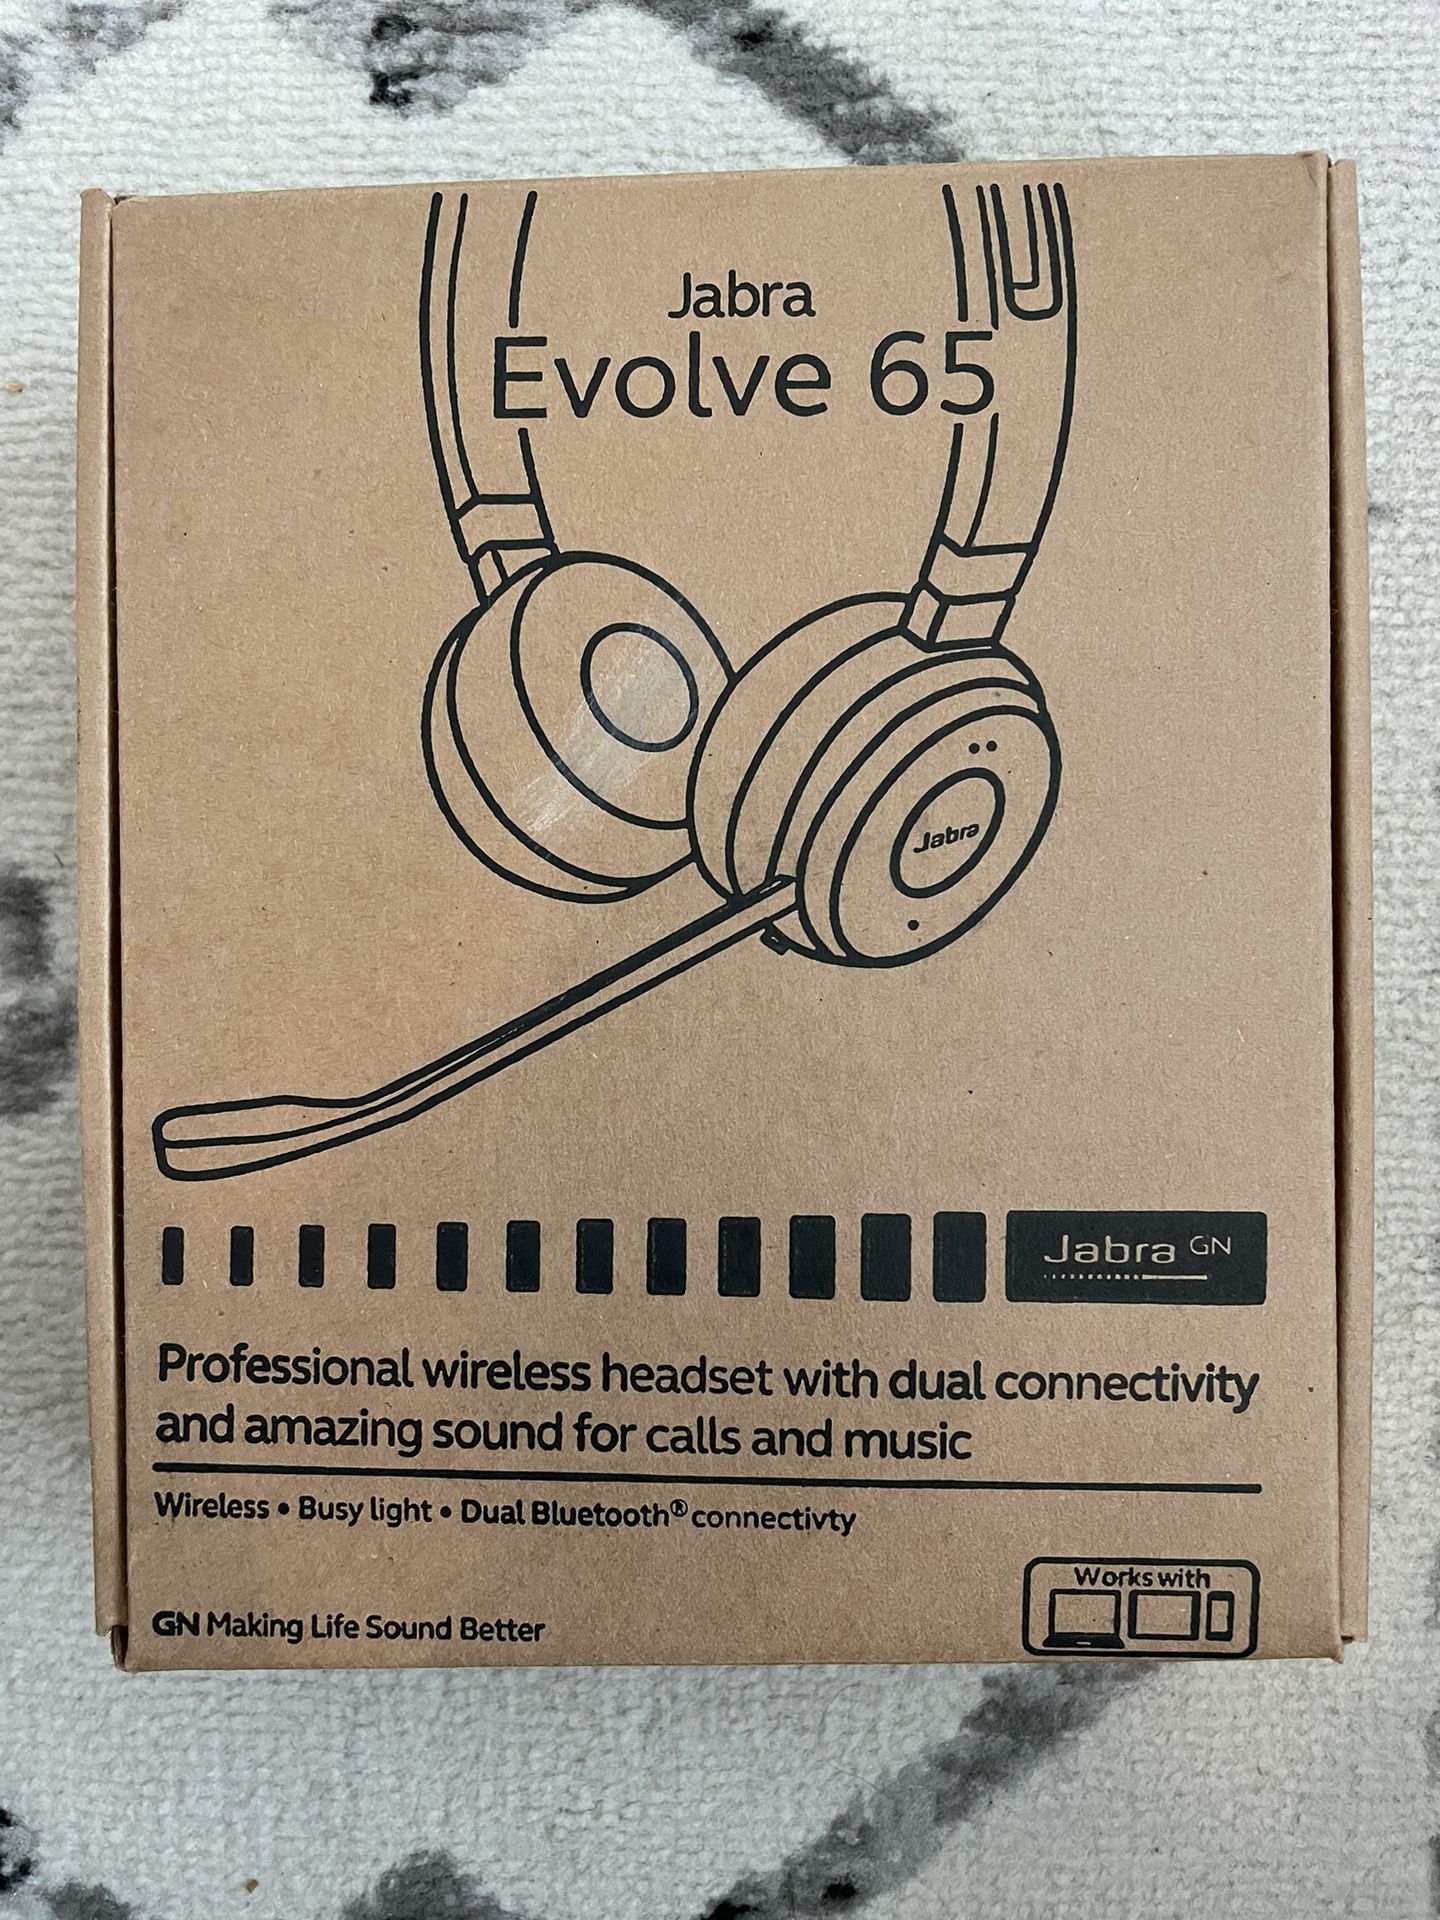 Jabra Evolve 65 MS Wireless Headset, Stereo – Includes Link 370 USB Adapter